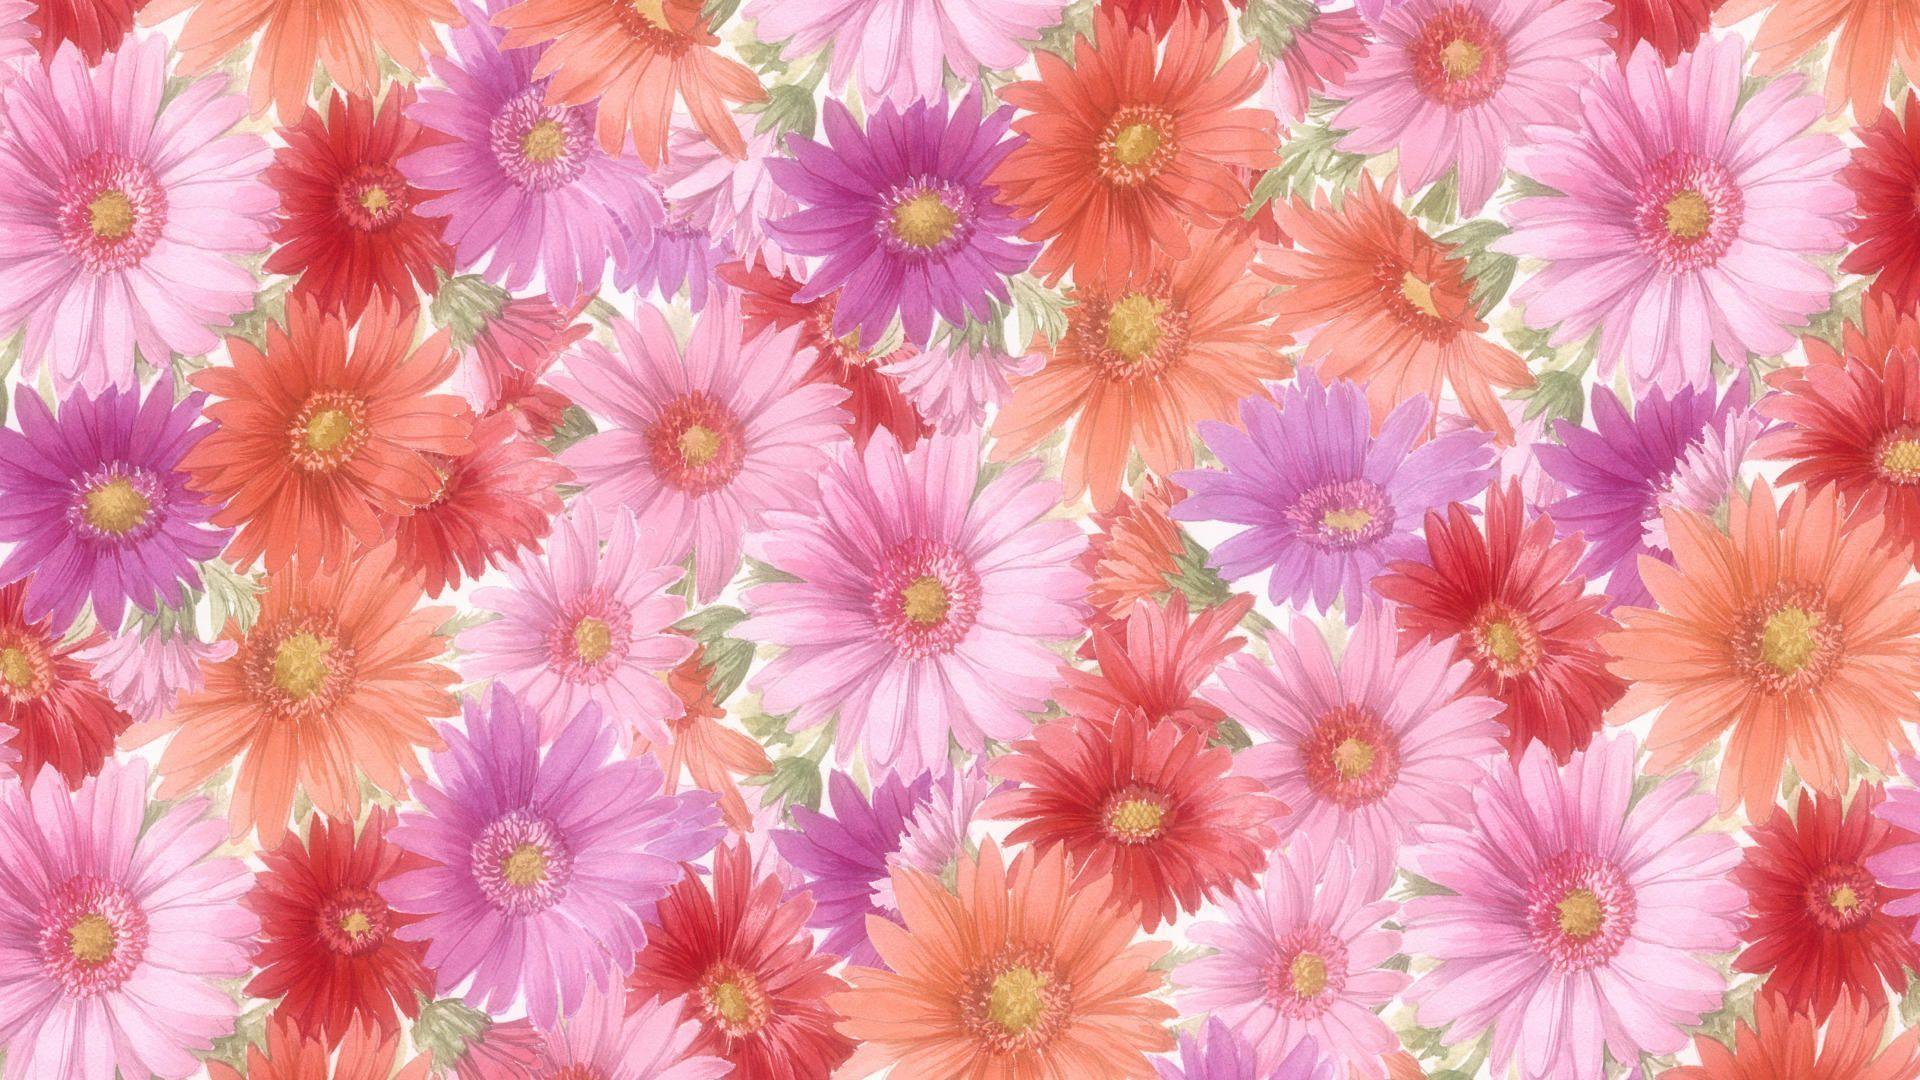 Cool Flowers HD WallpaperHD Wallpaper the Home of HD Picture